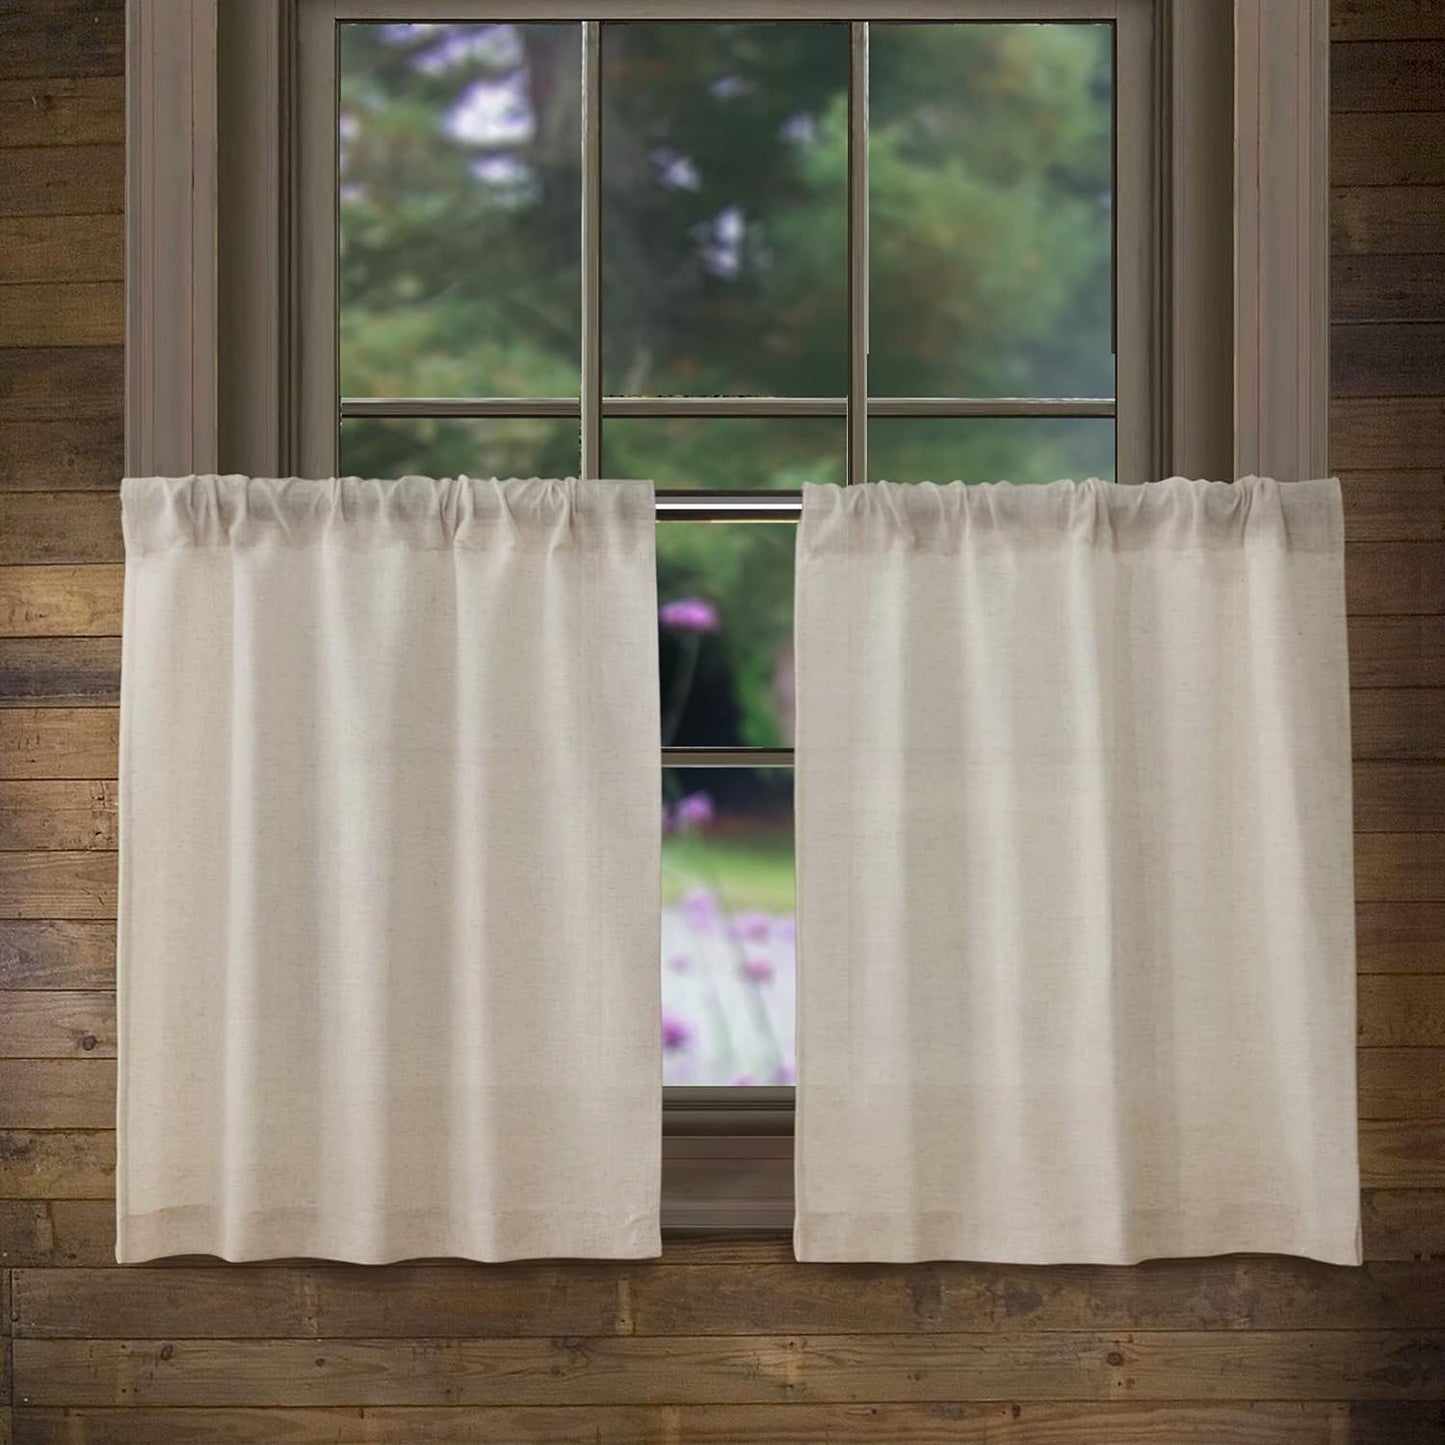 Valea Home Linen Kitchen Curtains 45 Inch Length Rustic Farmhouse Crude Short Cafe Curtains Rod Pocket Tiers for Small Window Bathroom Basement, Natural, 2 Panels  Valea Home 27"W X 24"L  